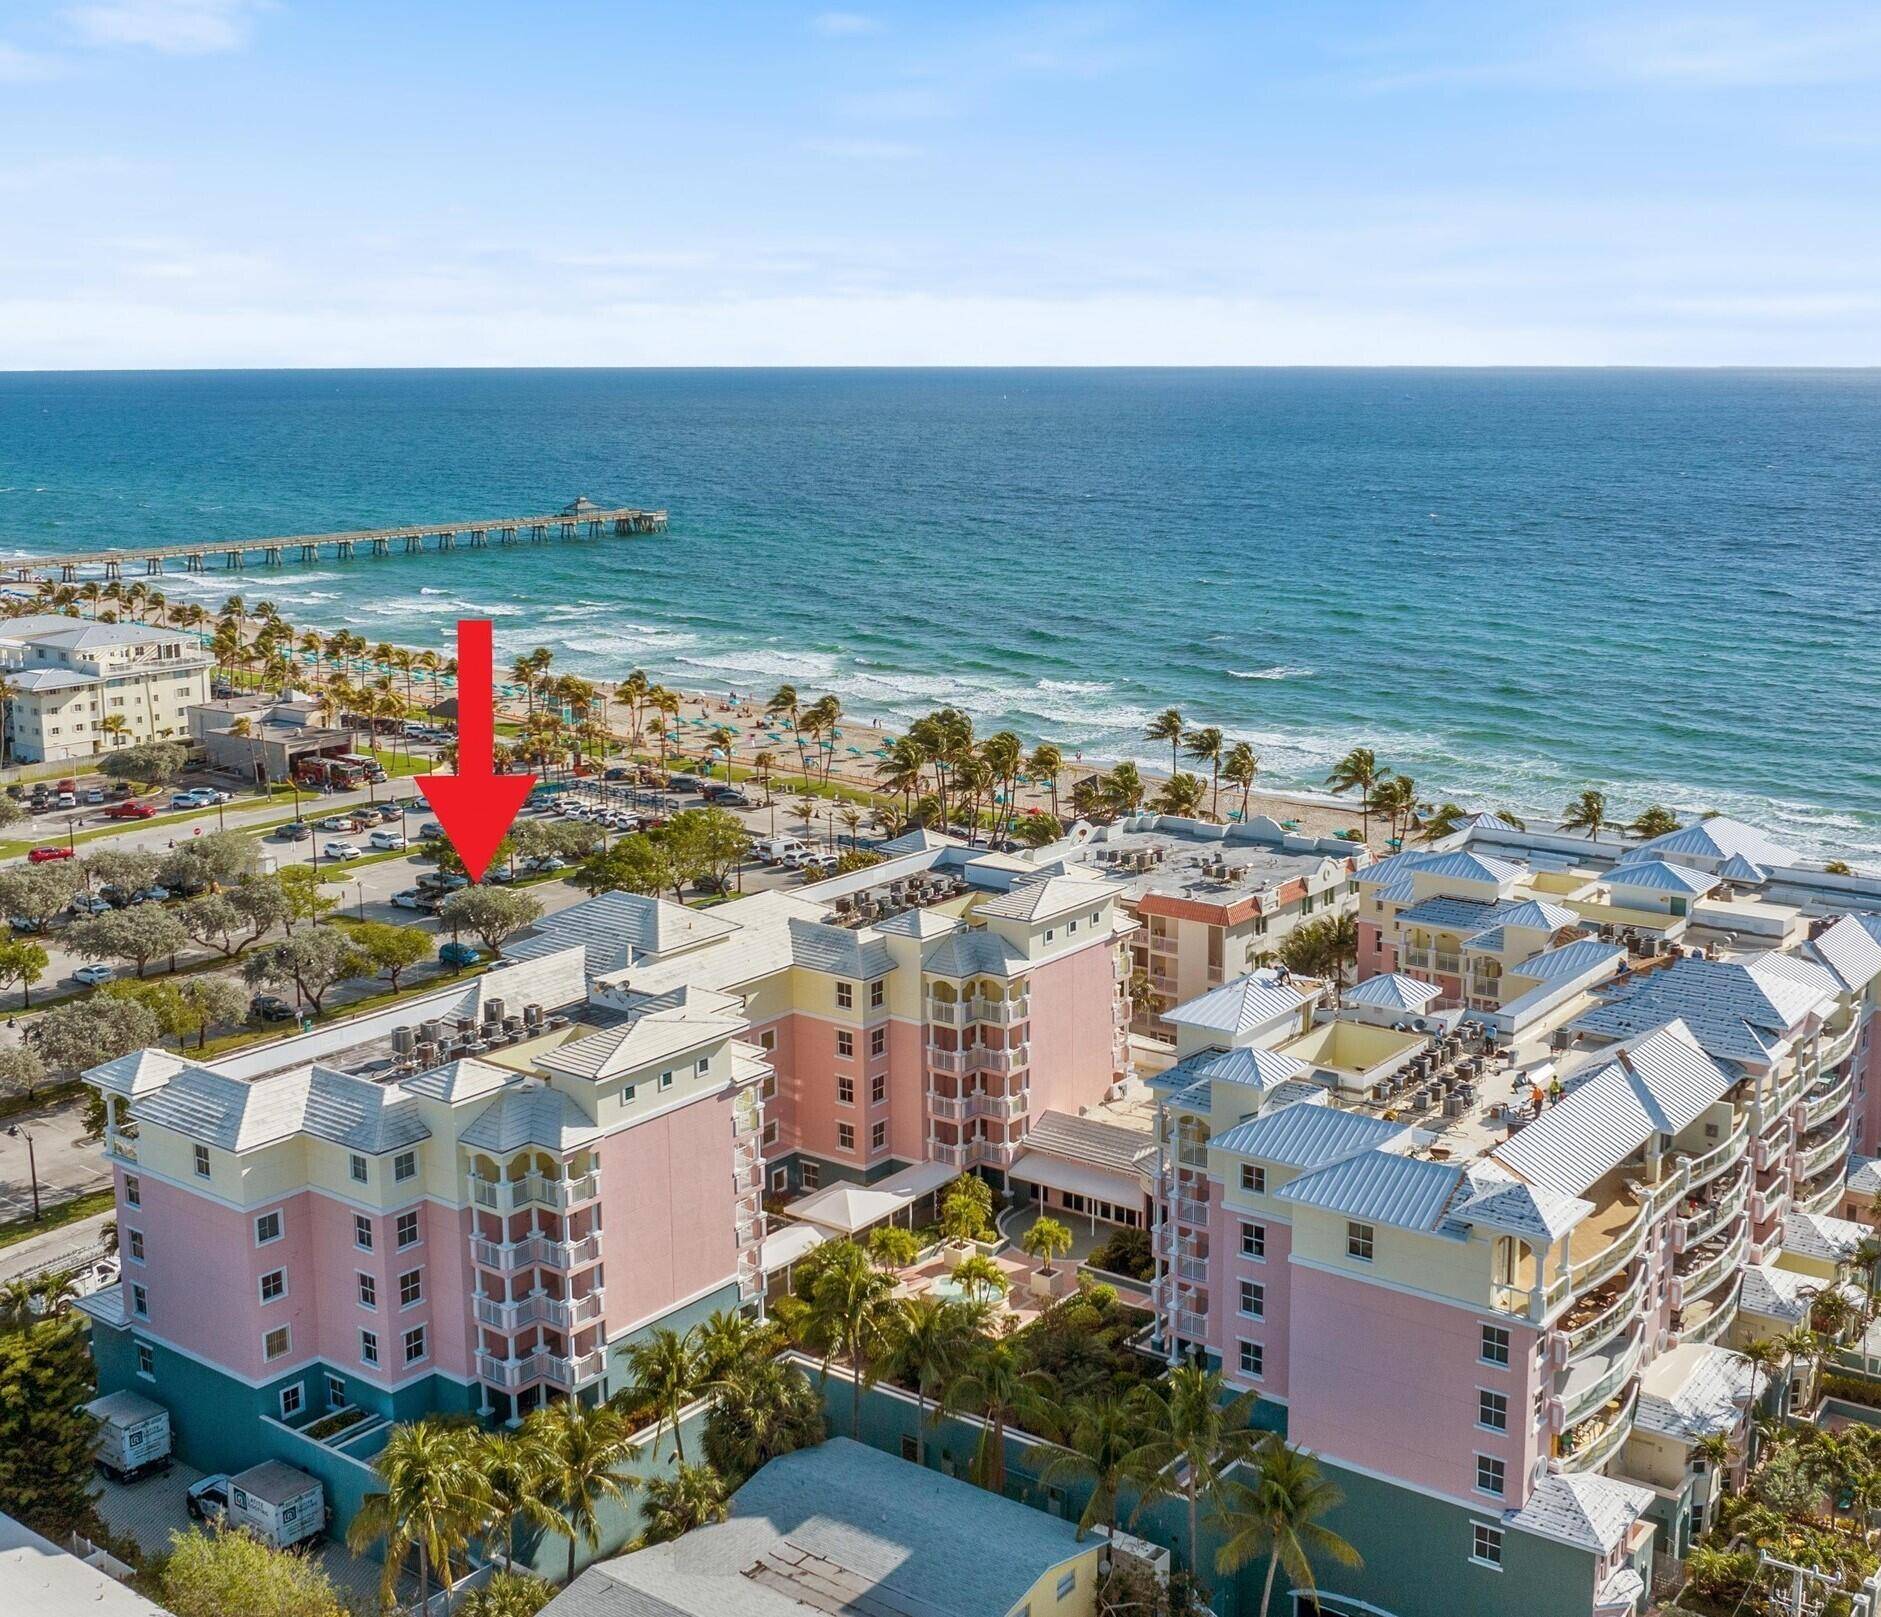 Enjoy beachfront living at its finest in this luxurious 3 bedroom, 2.